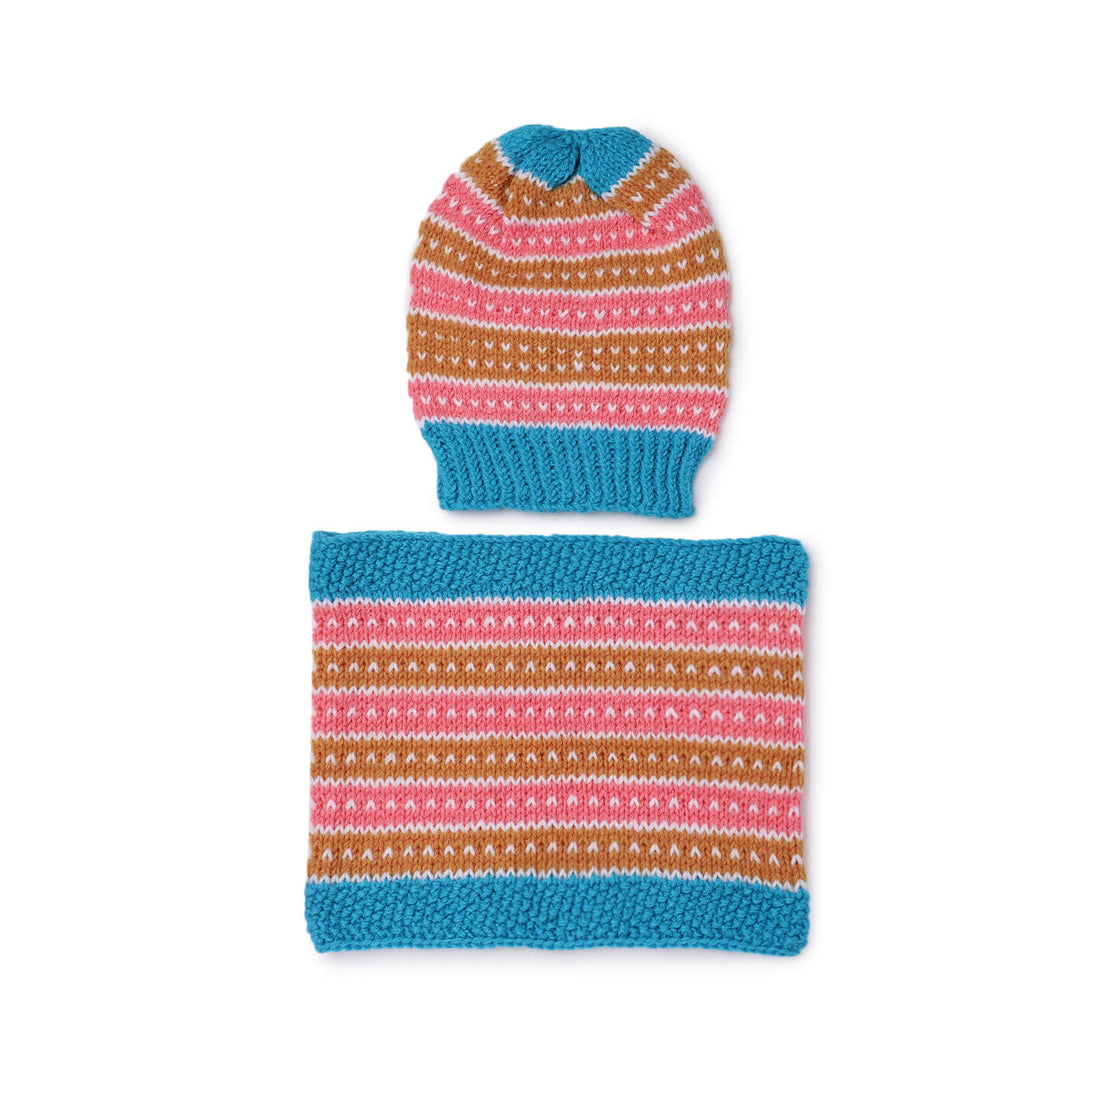 Double-Knit Cap and Neckwarmer Set - 2526